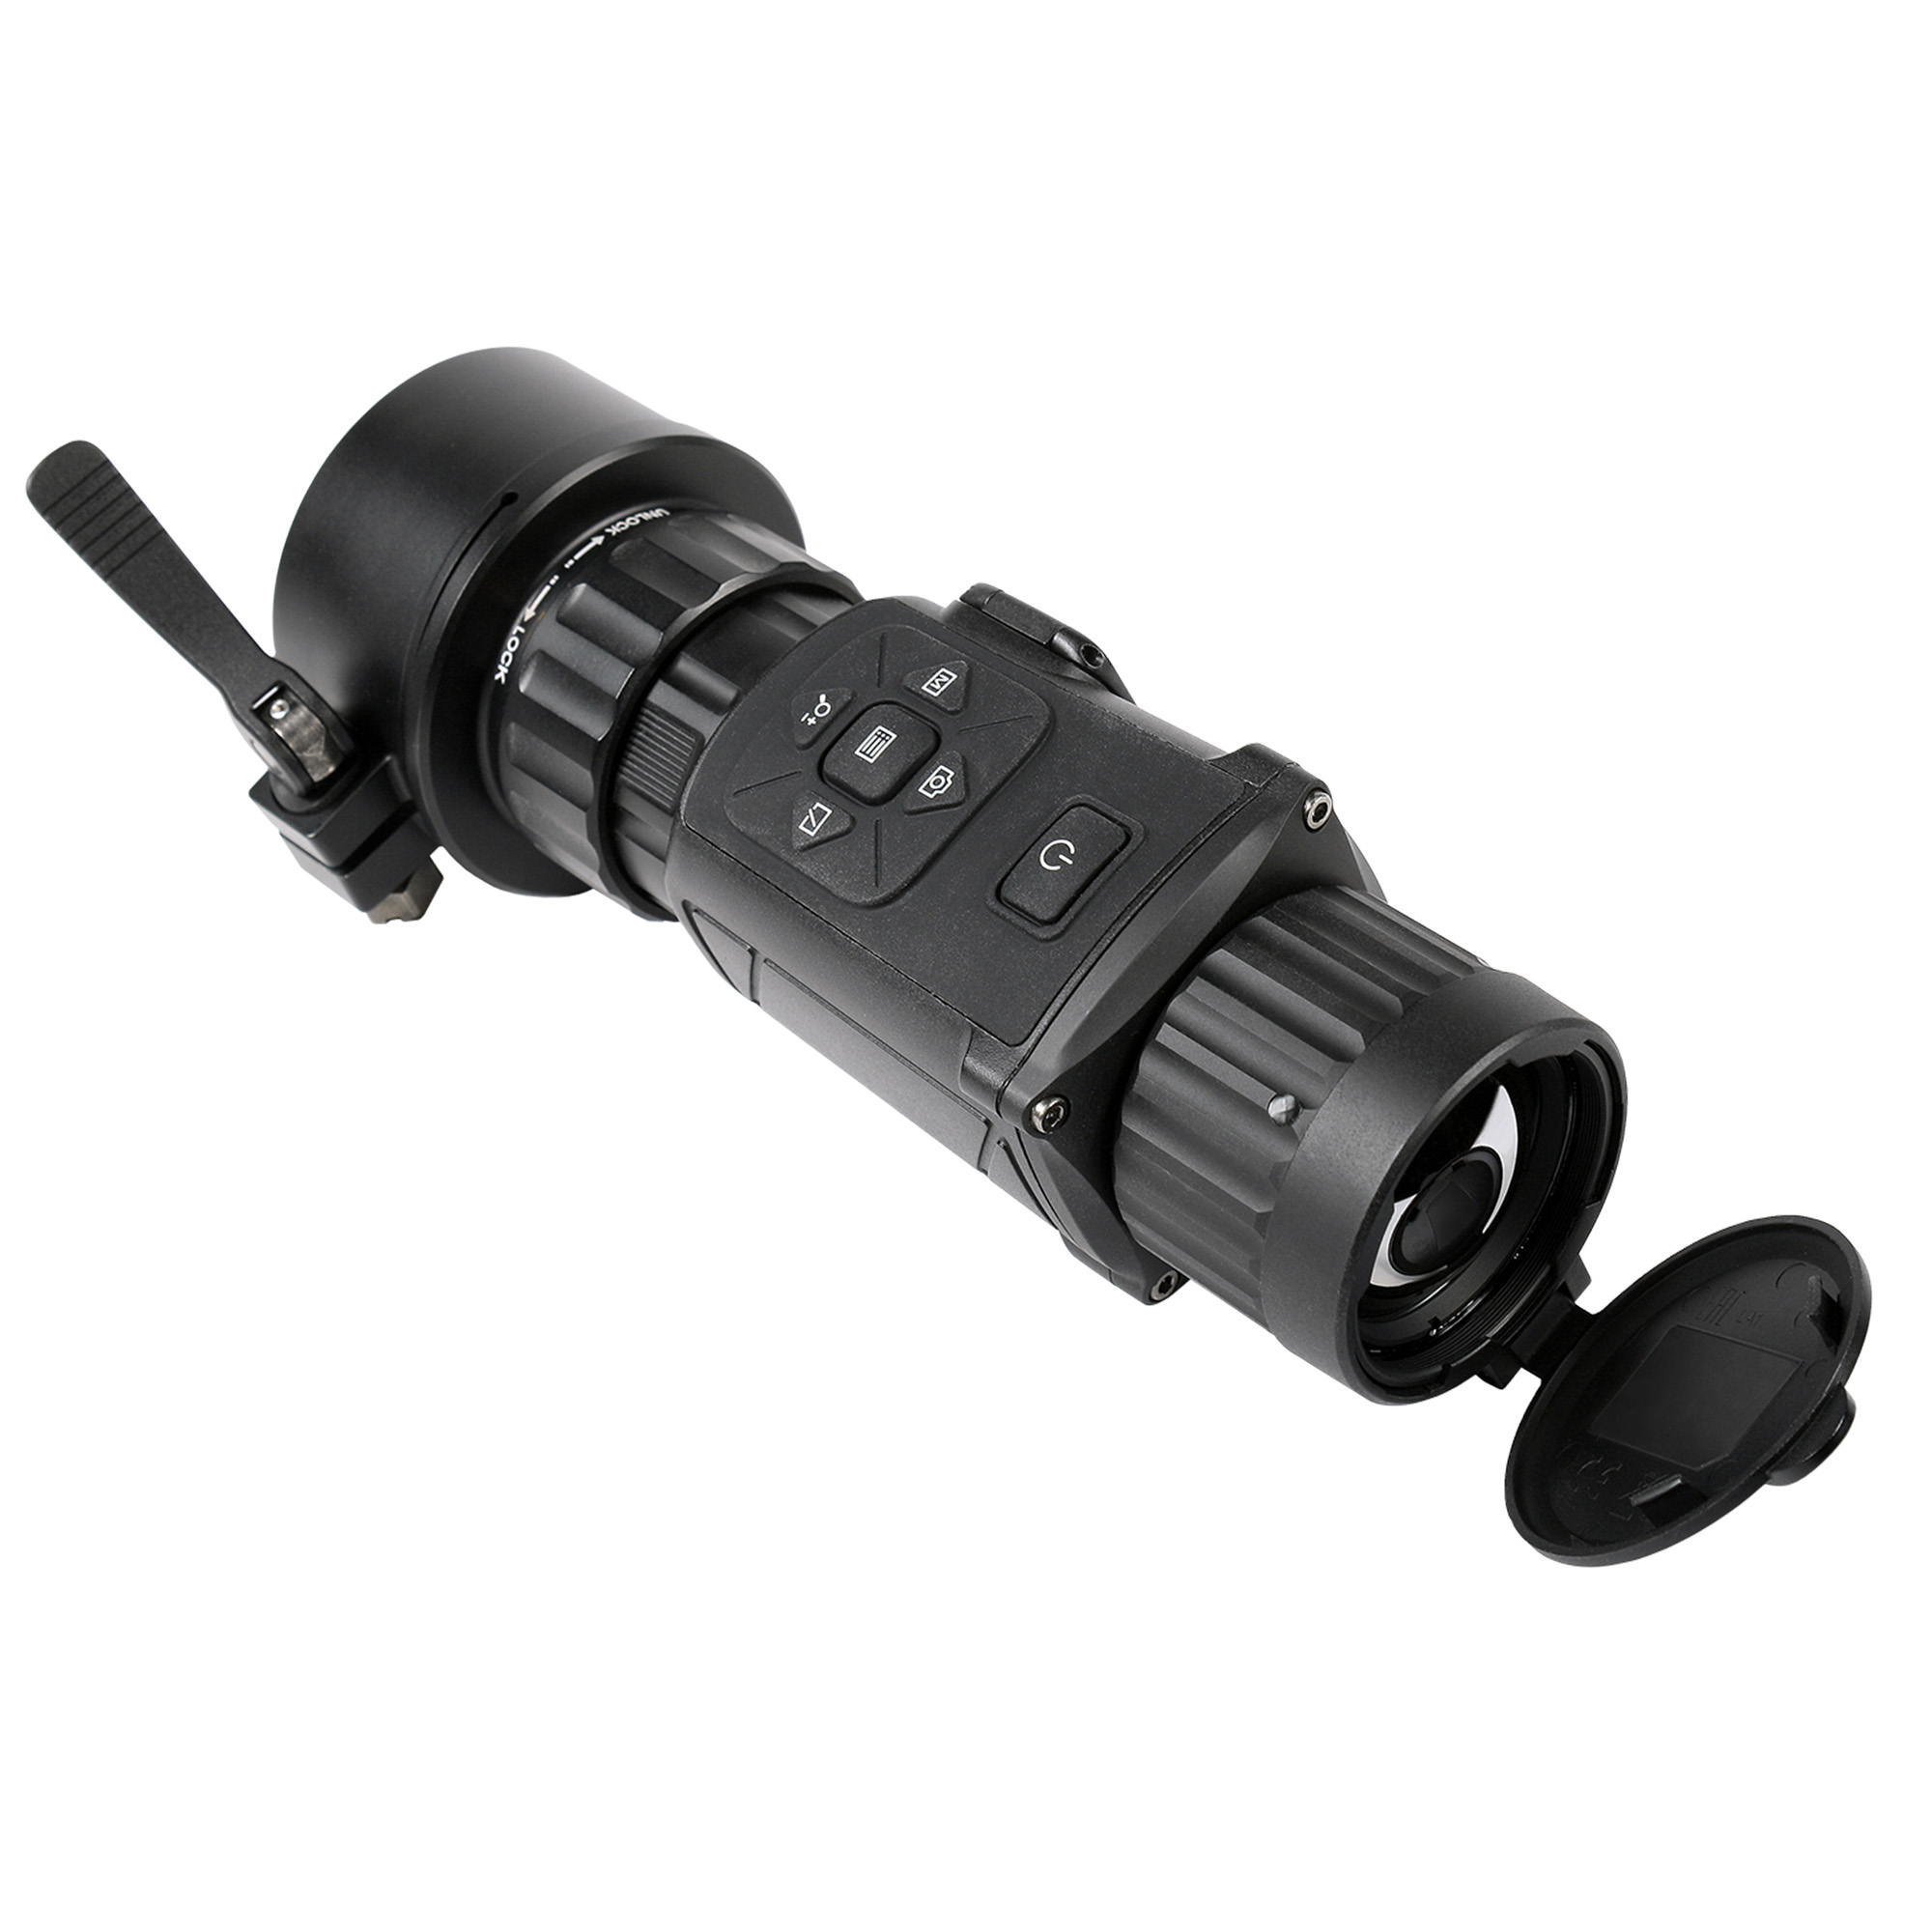 Agm Rattler Ts35-384 Thermal Scope